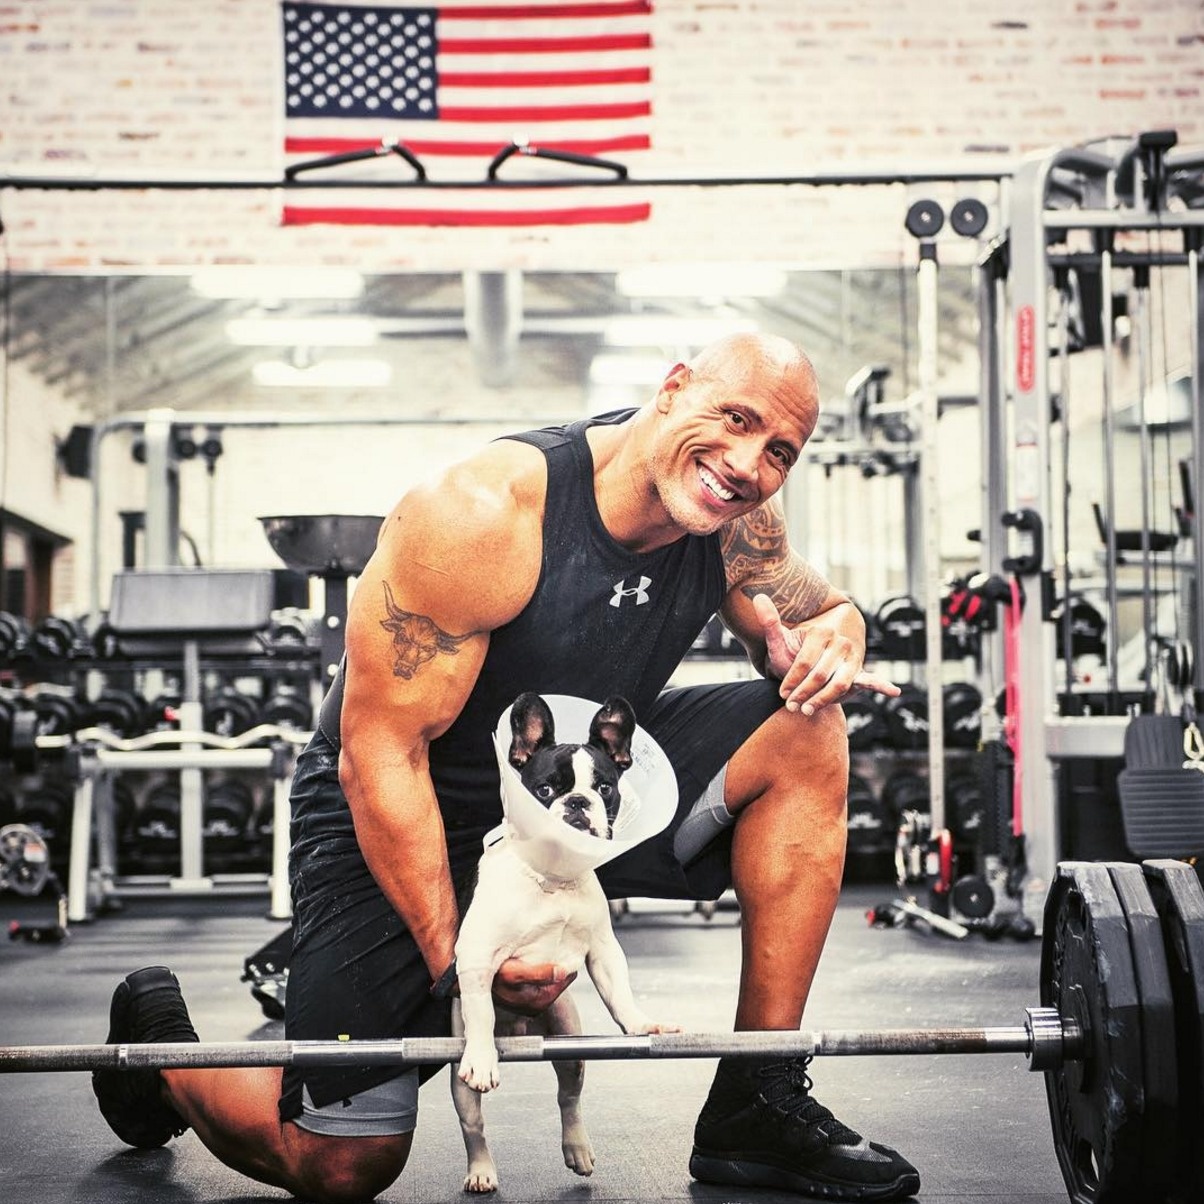 Dwayne "The Rock" Johnson donated the $1,500 needed to save the life of a puppy named Dwayne "The Rock" Johnson.